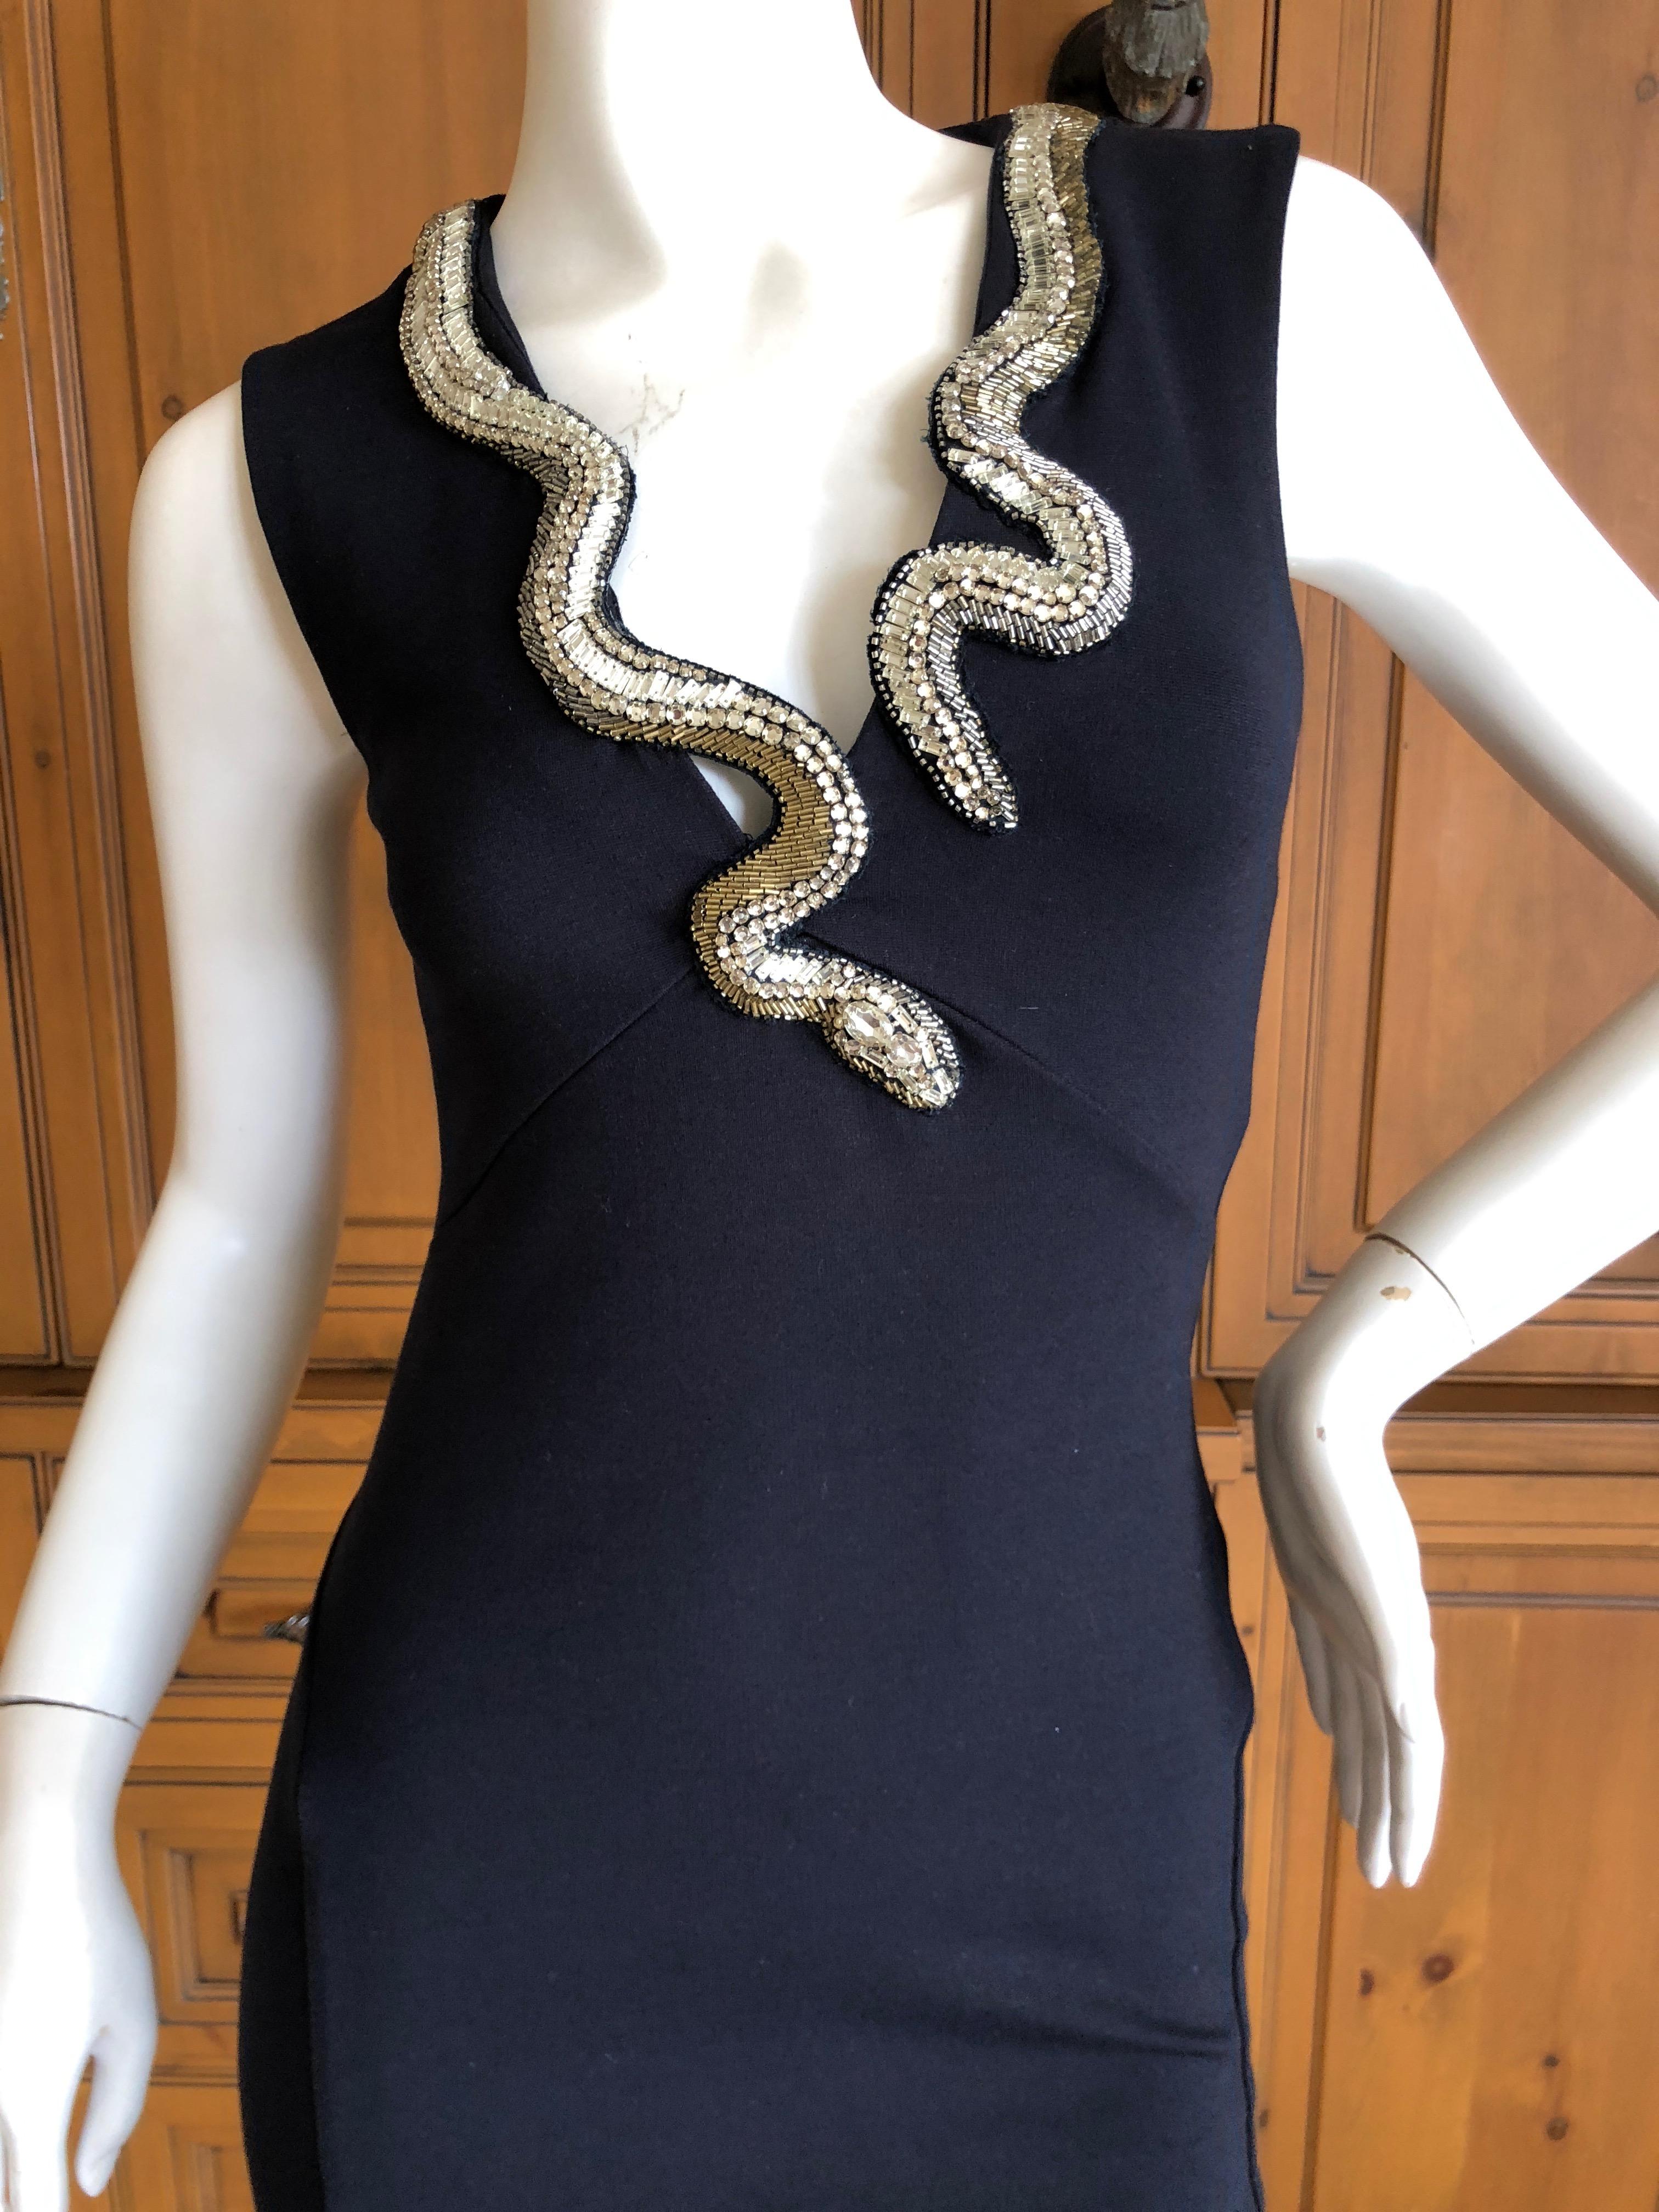 Roberto Cavalli Vintage Black Bodycon Dress w Crystal Embellished Snake Collar In Excellent Condition For Sale In Cloverdale, CA